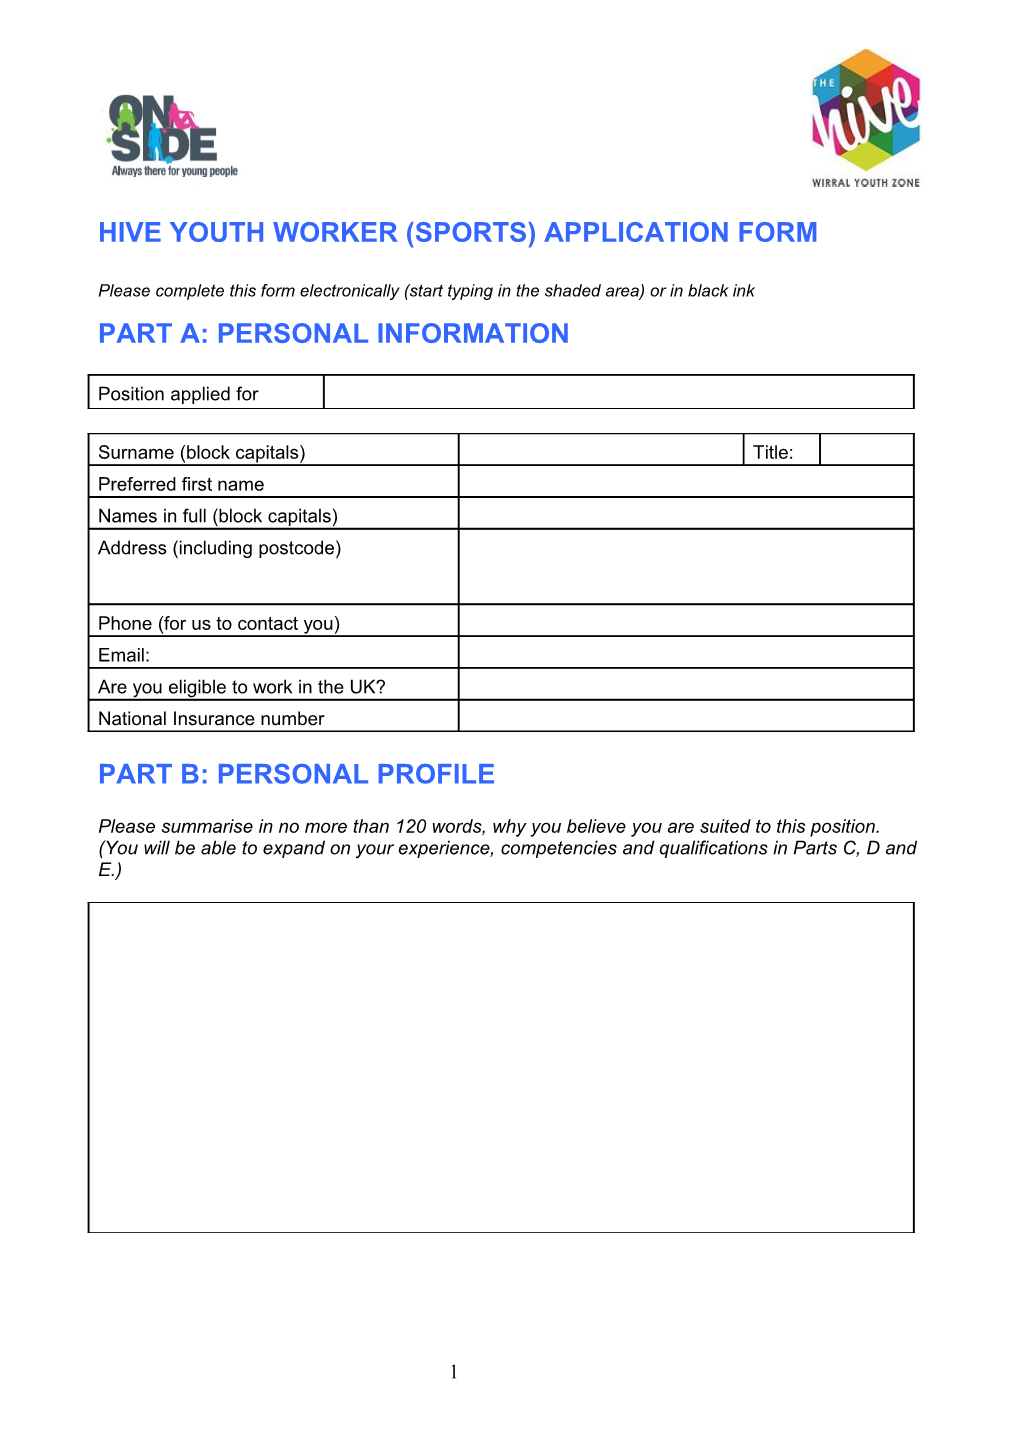 Hive Youth Worker (Sports) Application Form